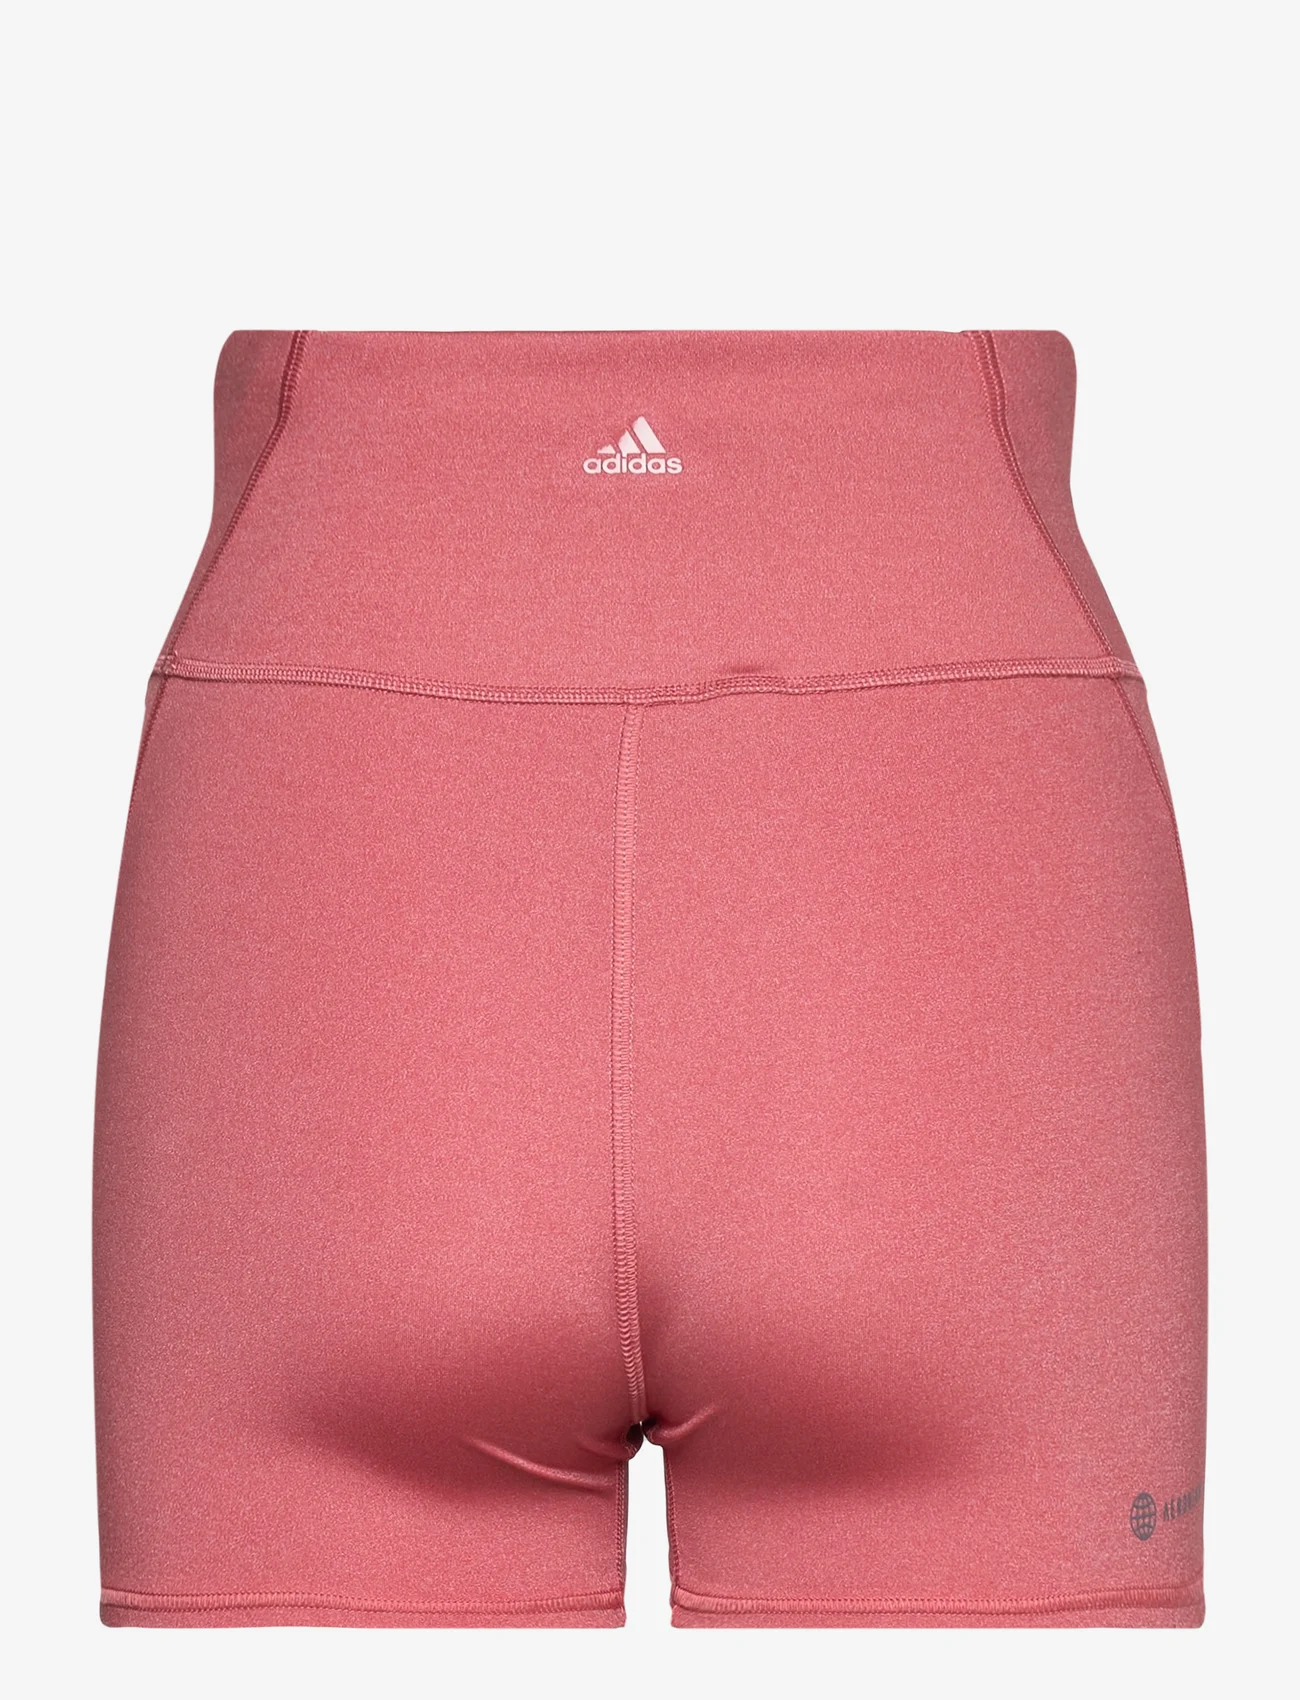 adidas Performance - Yoga Studio Luxe Fire Super-High-Waisted Short Tights - krótkie rajstopy - wonred - 1